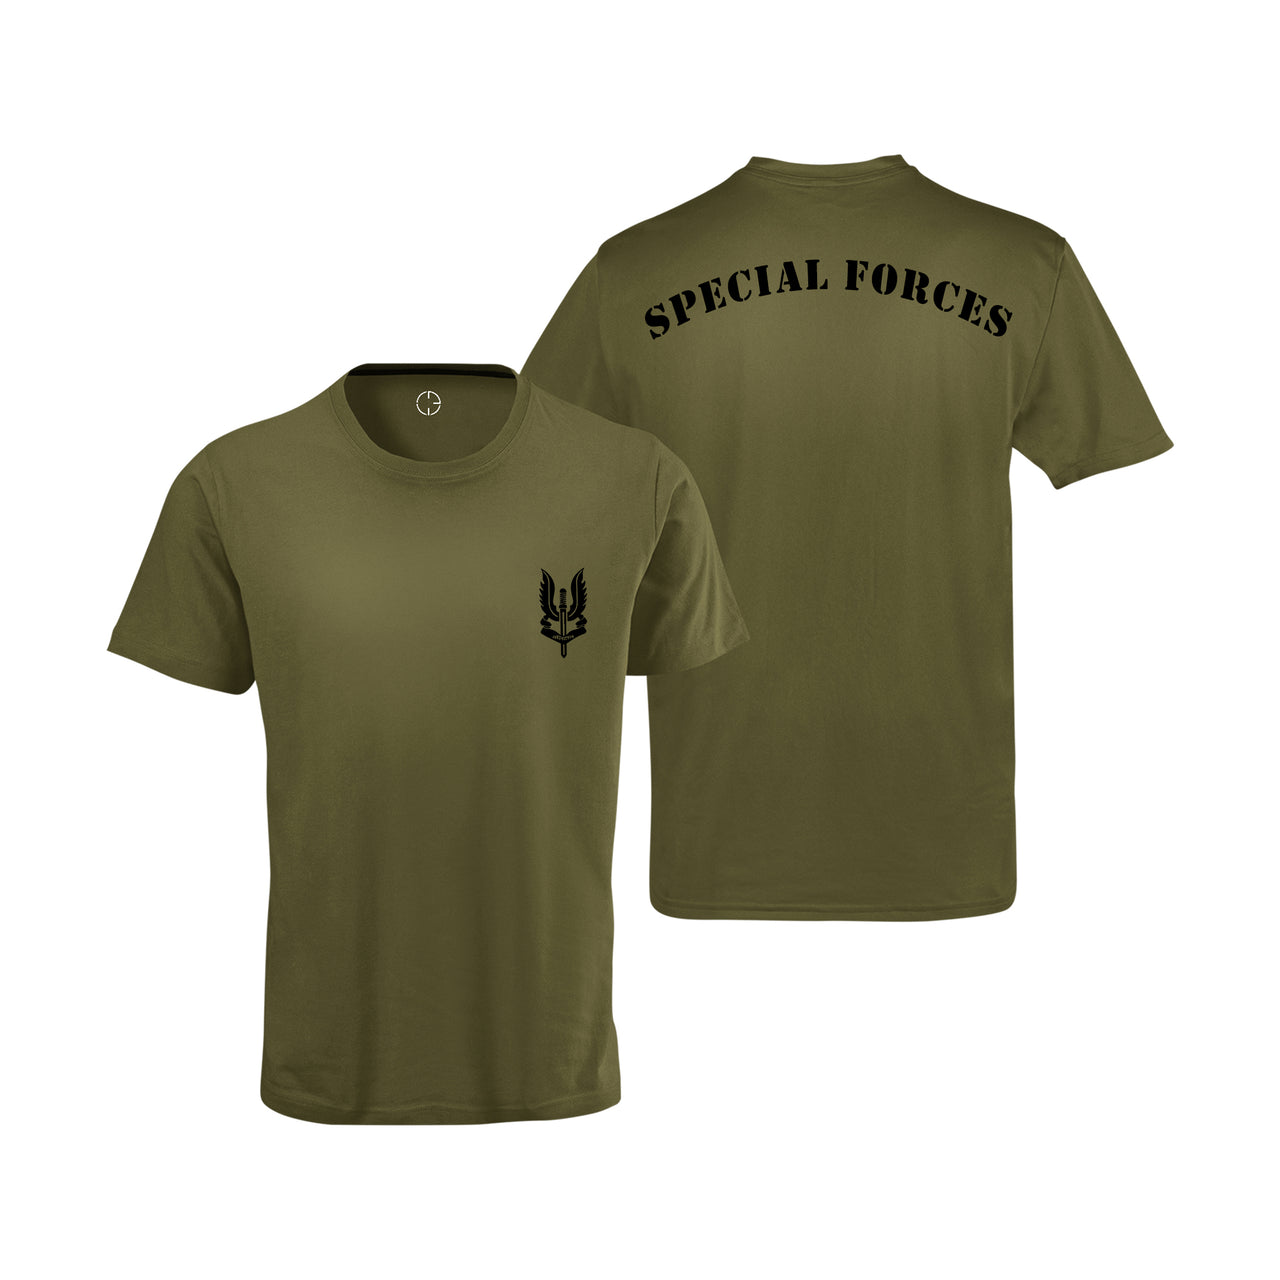 Military T-Shirt - Special Forces (Men)